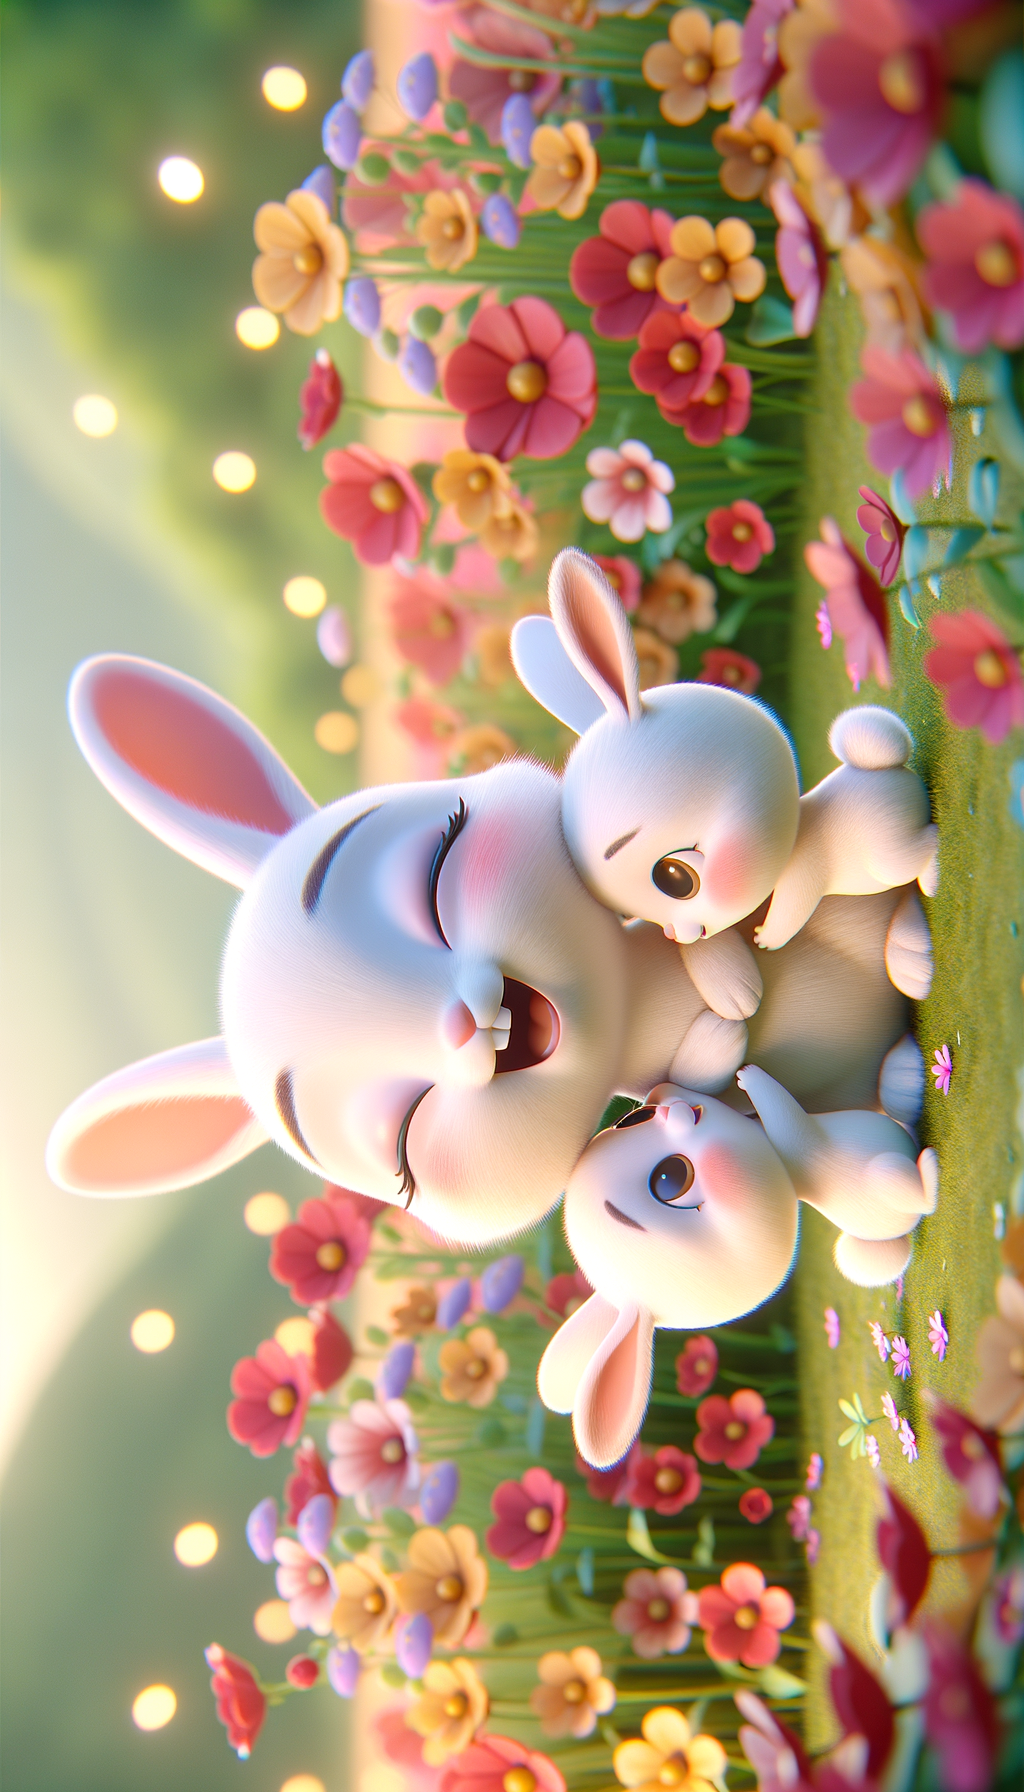 the mother bunny is hugged by the little bunnies and smiling, there is a flower meadow in the background